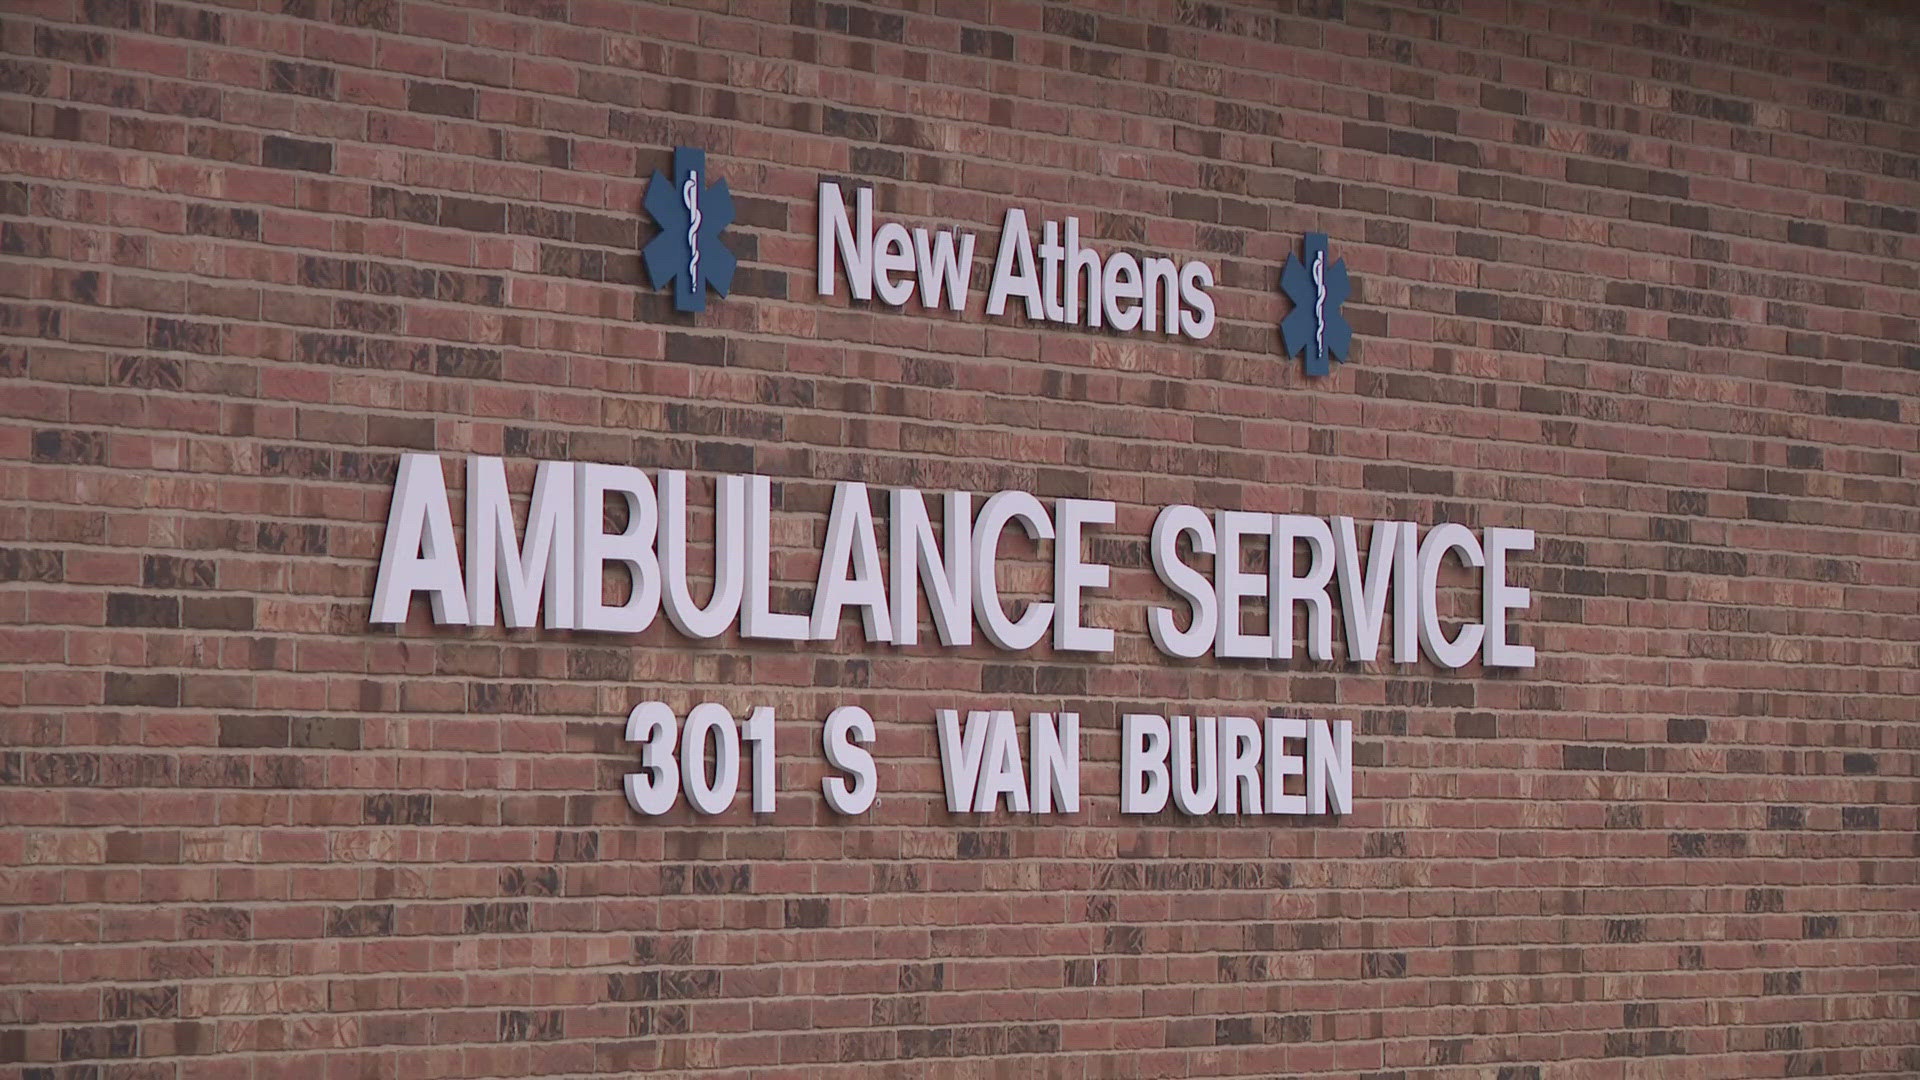 A small town in the Metro East will no longer have its own ambulance service. The mayor of New Athens said the program was costing the community too much money.